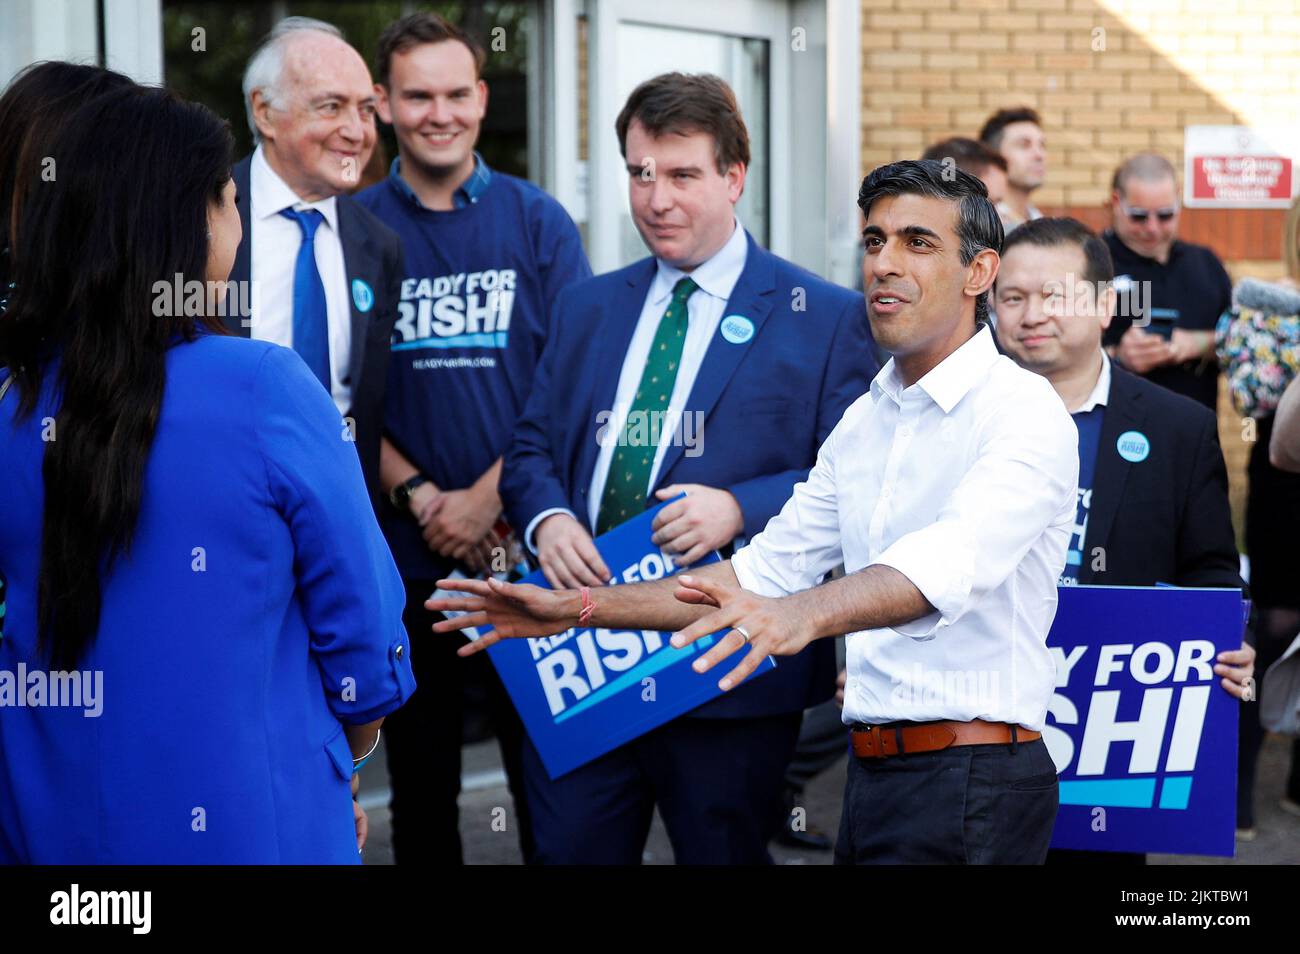 Britain's Conservative Party leadership candidate Rishi Sunak and Former leader of the Conservative Party Michael Howard attend a hustings event as part of the leadership campaign, in Cardiff, Britain, August 3, 2022. REUTERS/Peter Nicholls Stock Photo